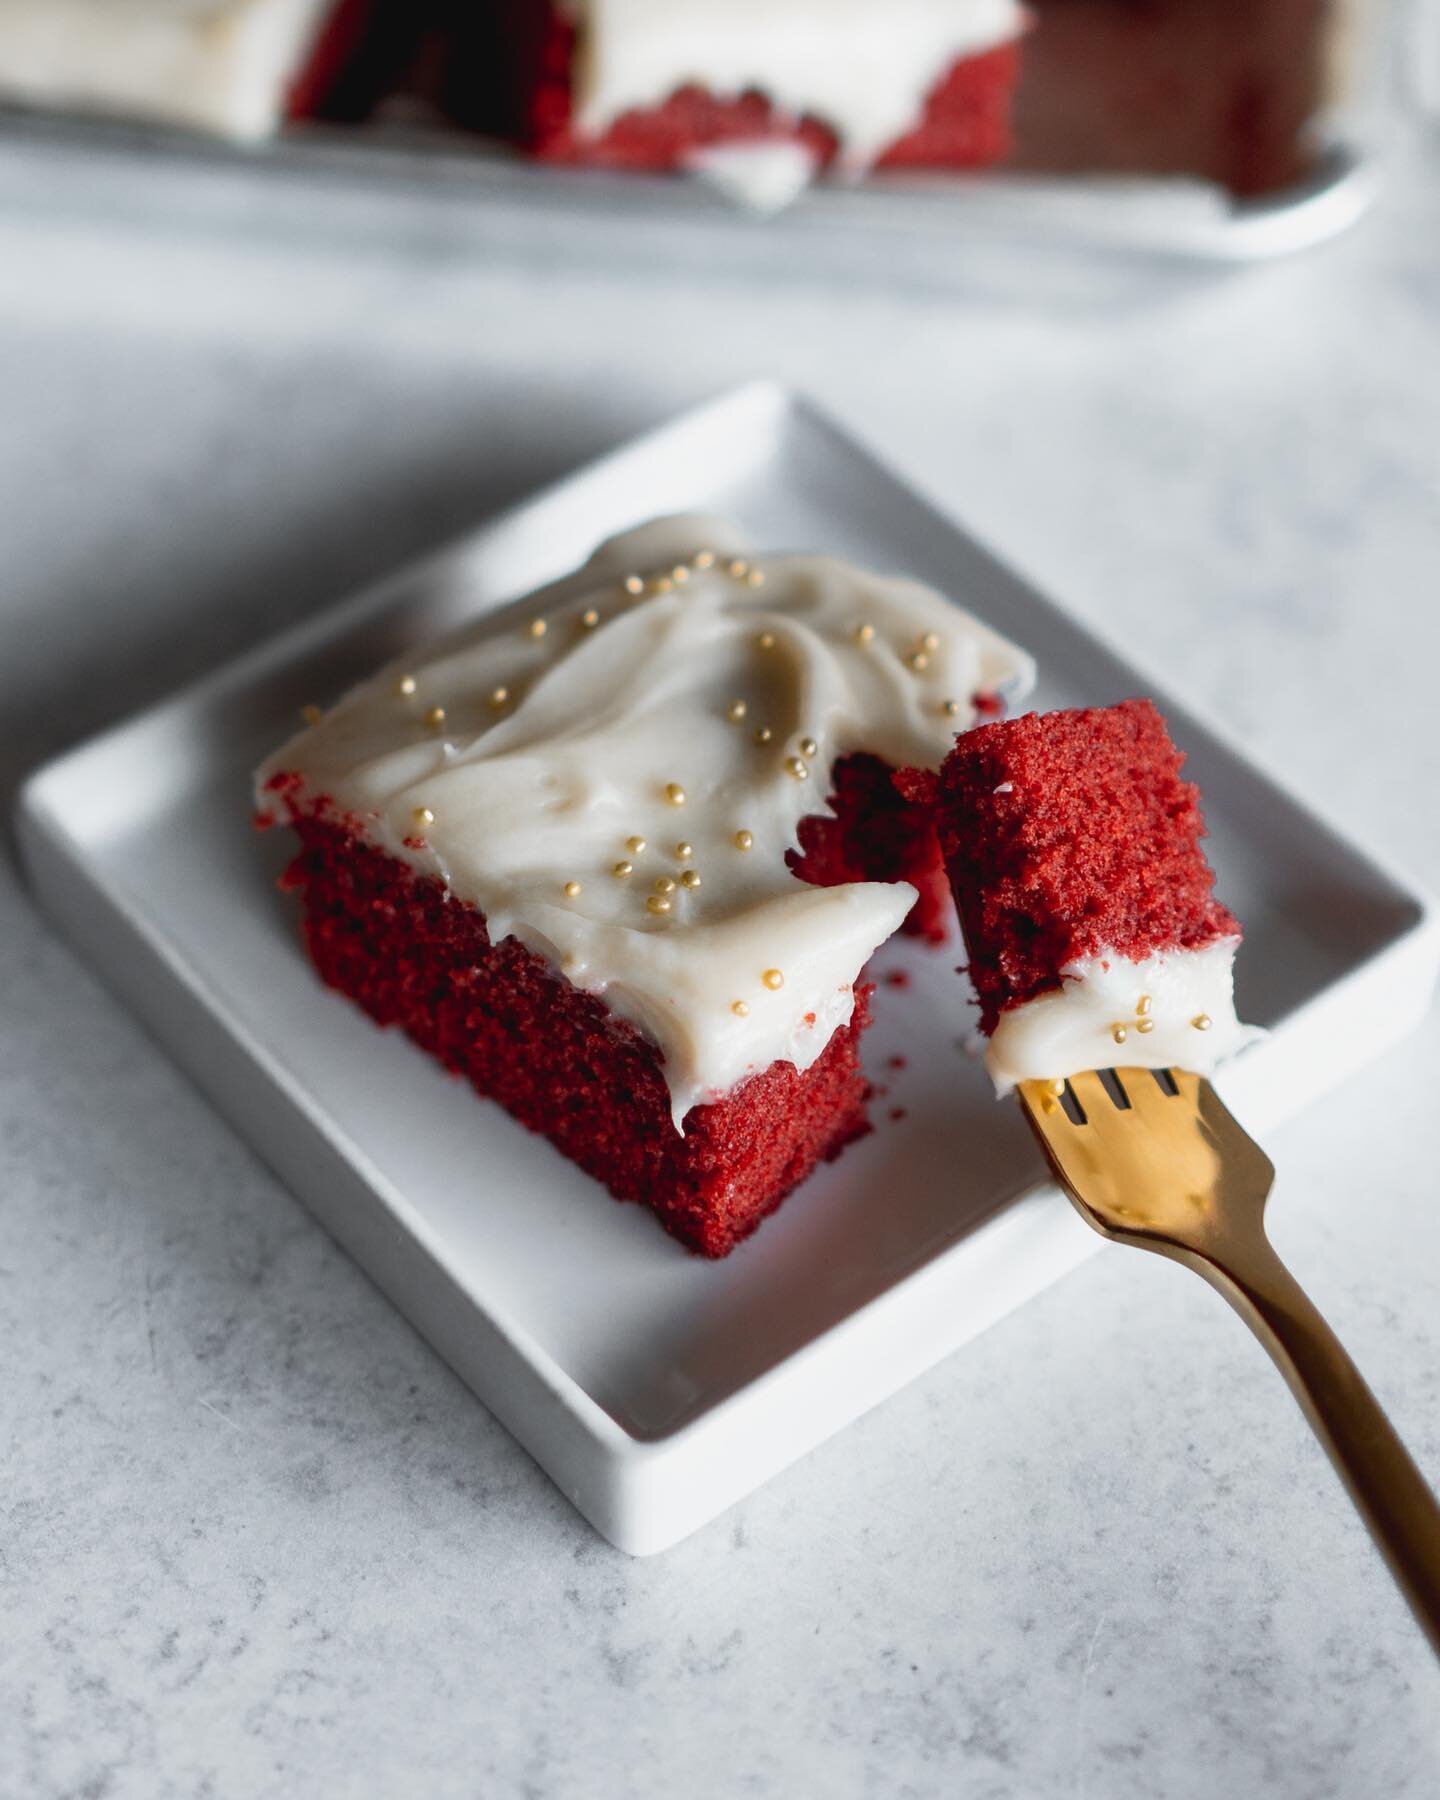 In defense of Red Velvet! 

Red Velvet cake has been getting a bum rap on the internet these days, but I&rsquo;m here to make the case that Red Velvet cake is&hellip;.good?! Yes, it&rsquo;s good! 

While it&rsquo;s not my go-to dessert, there&rsquo;s